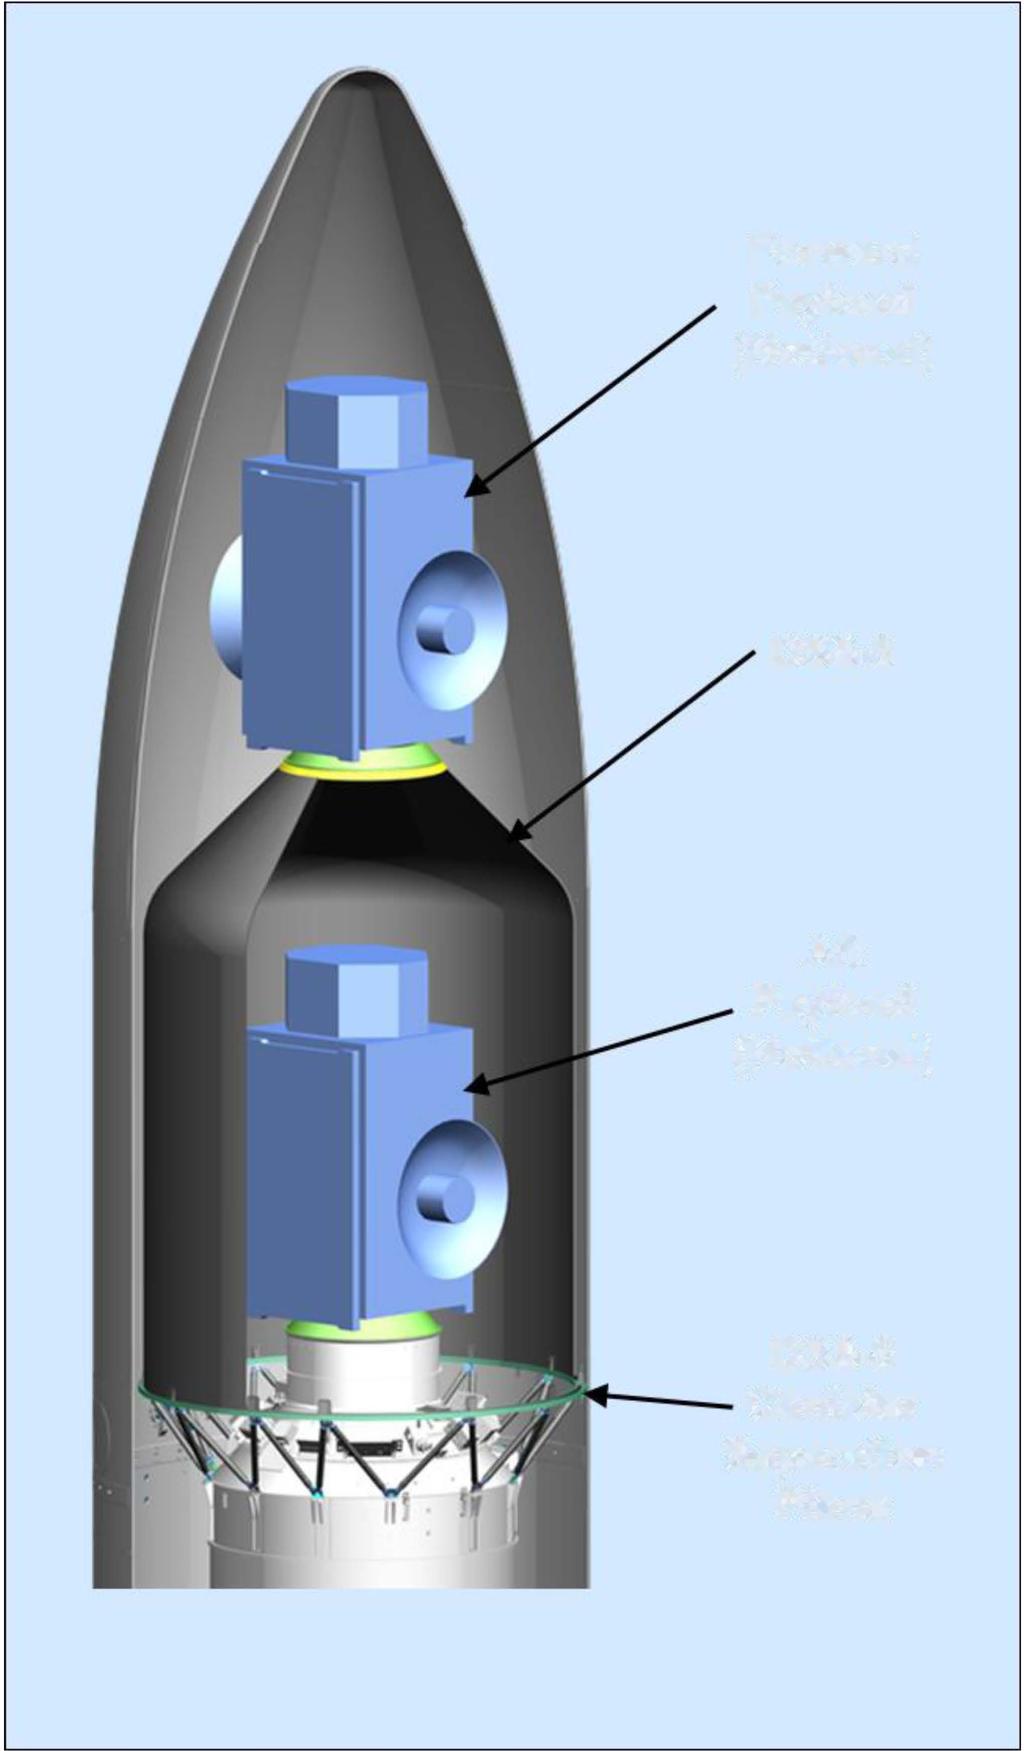 two, three, or four DSS-4 plug sections to provide flexibility in the heights of the forward and aft spacecraft volumes.